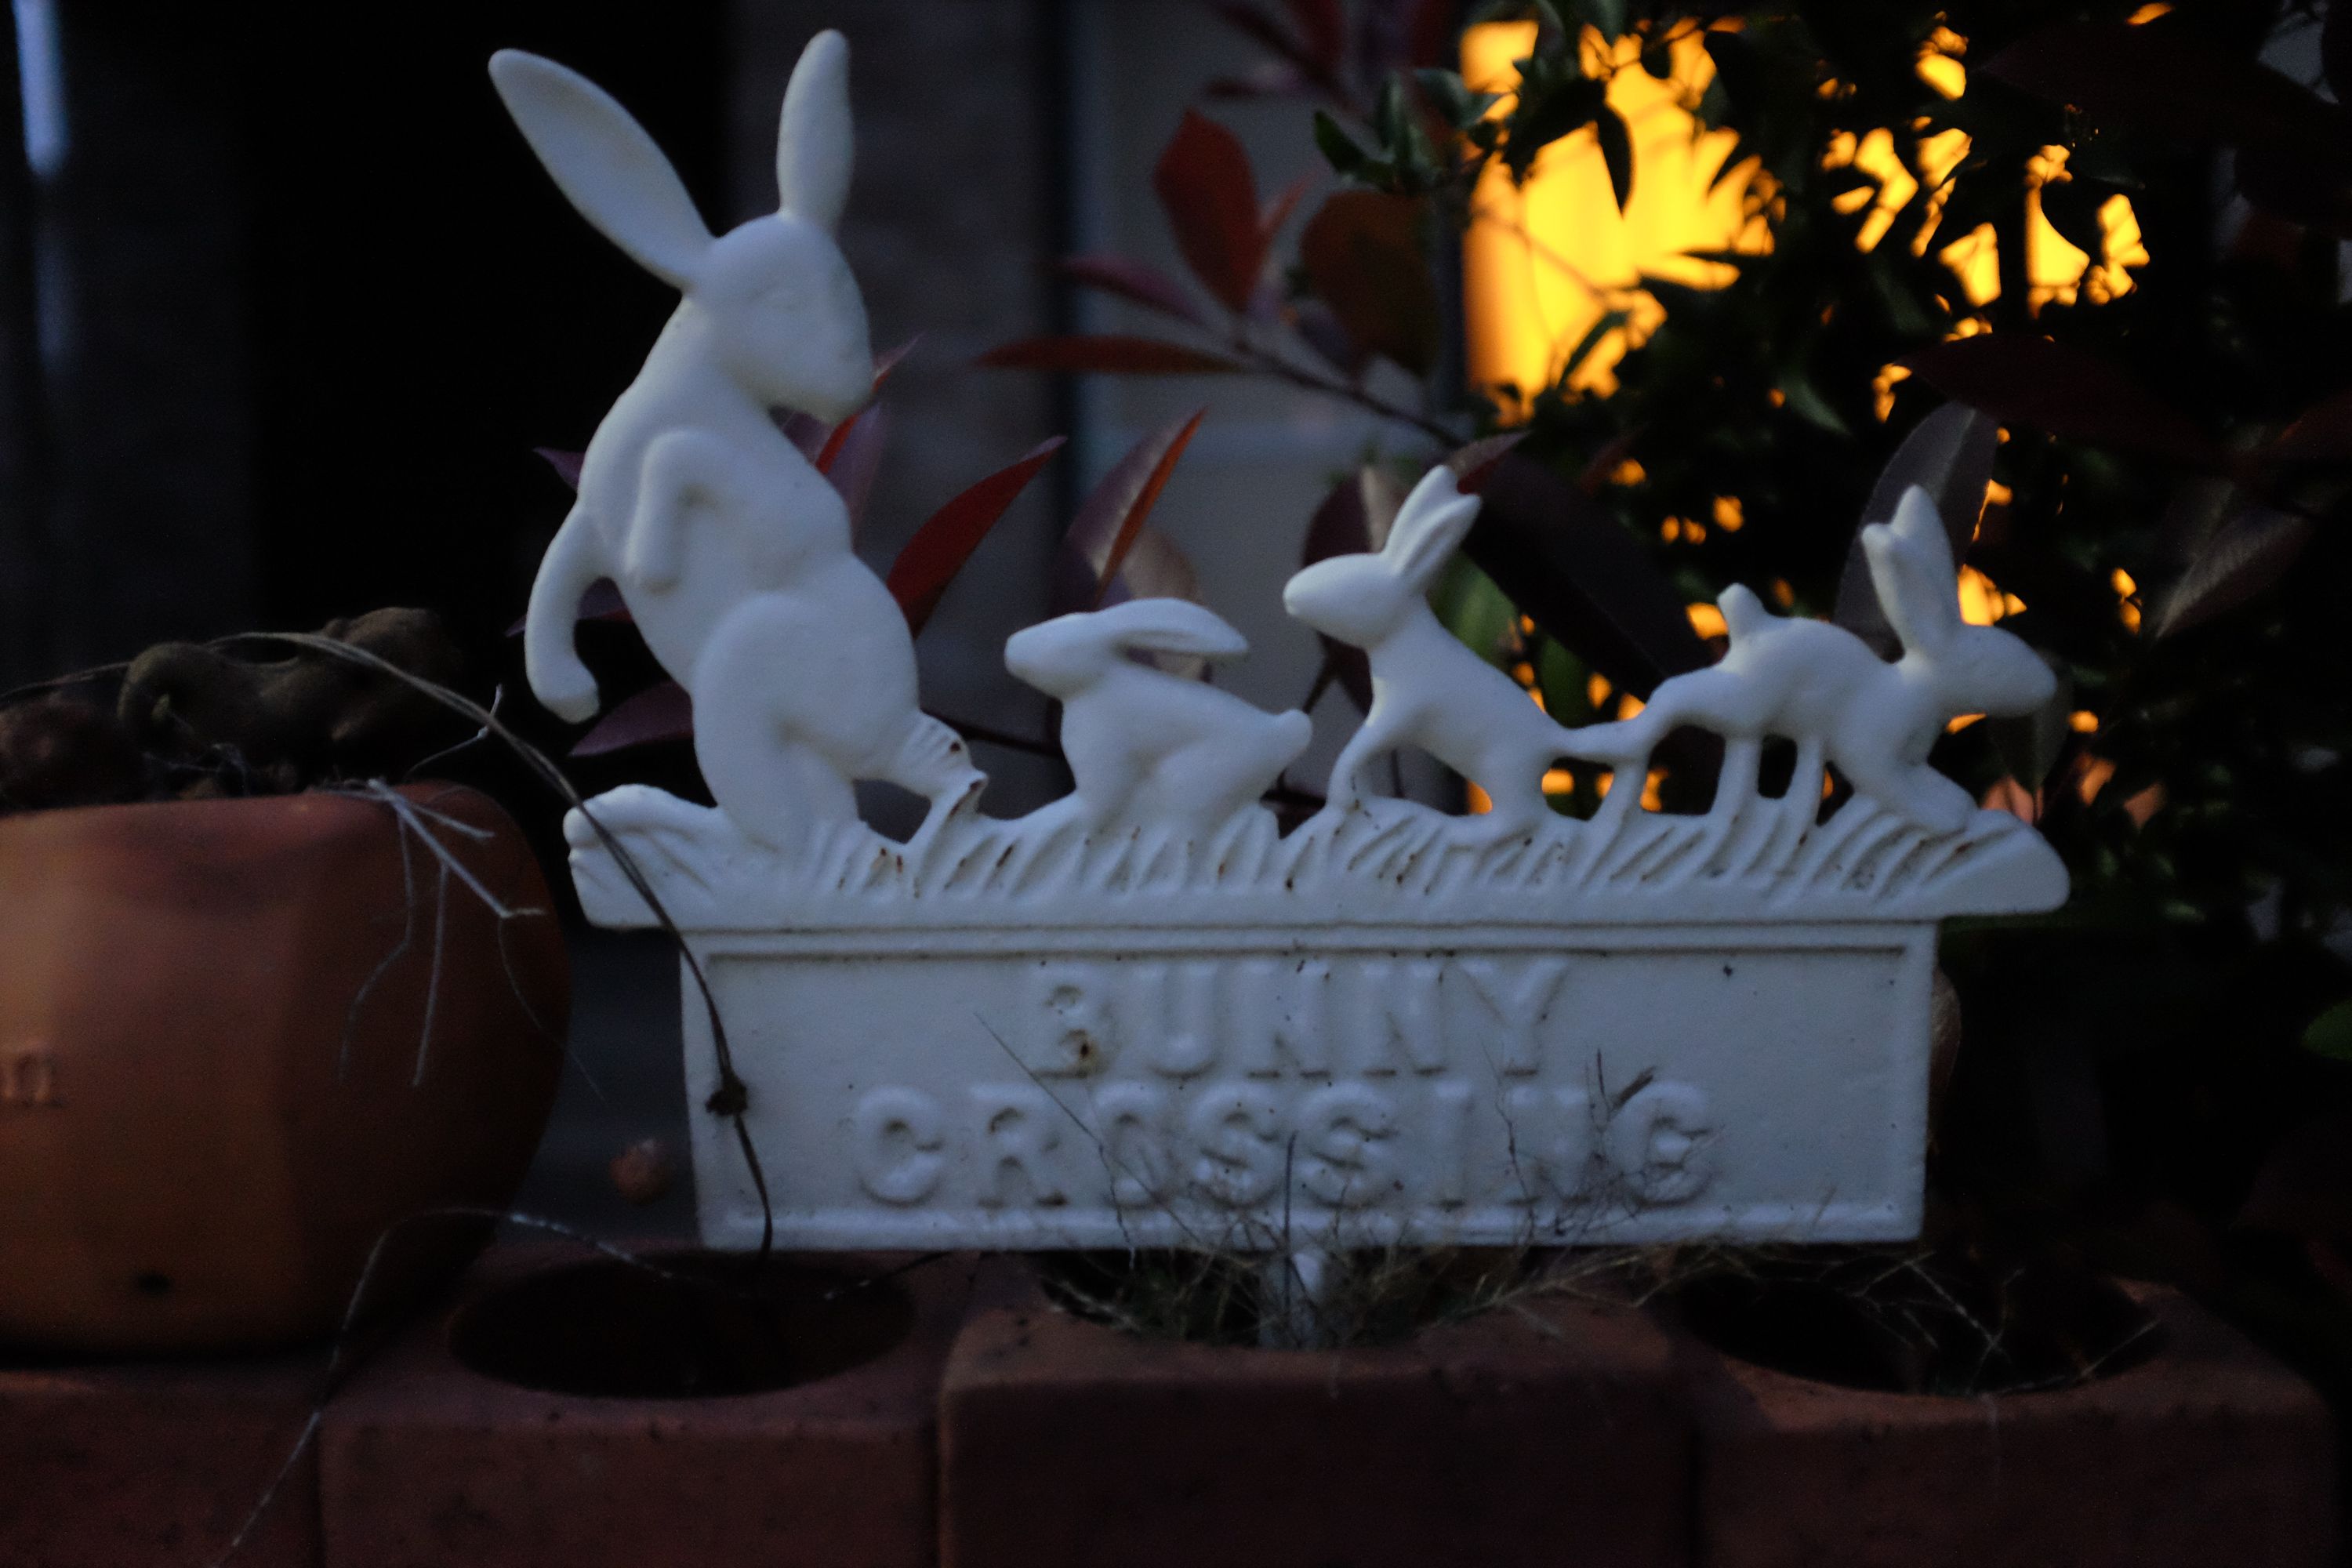 A sign says “Bunny crossing” and shows one large and three small hares.